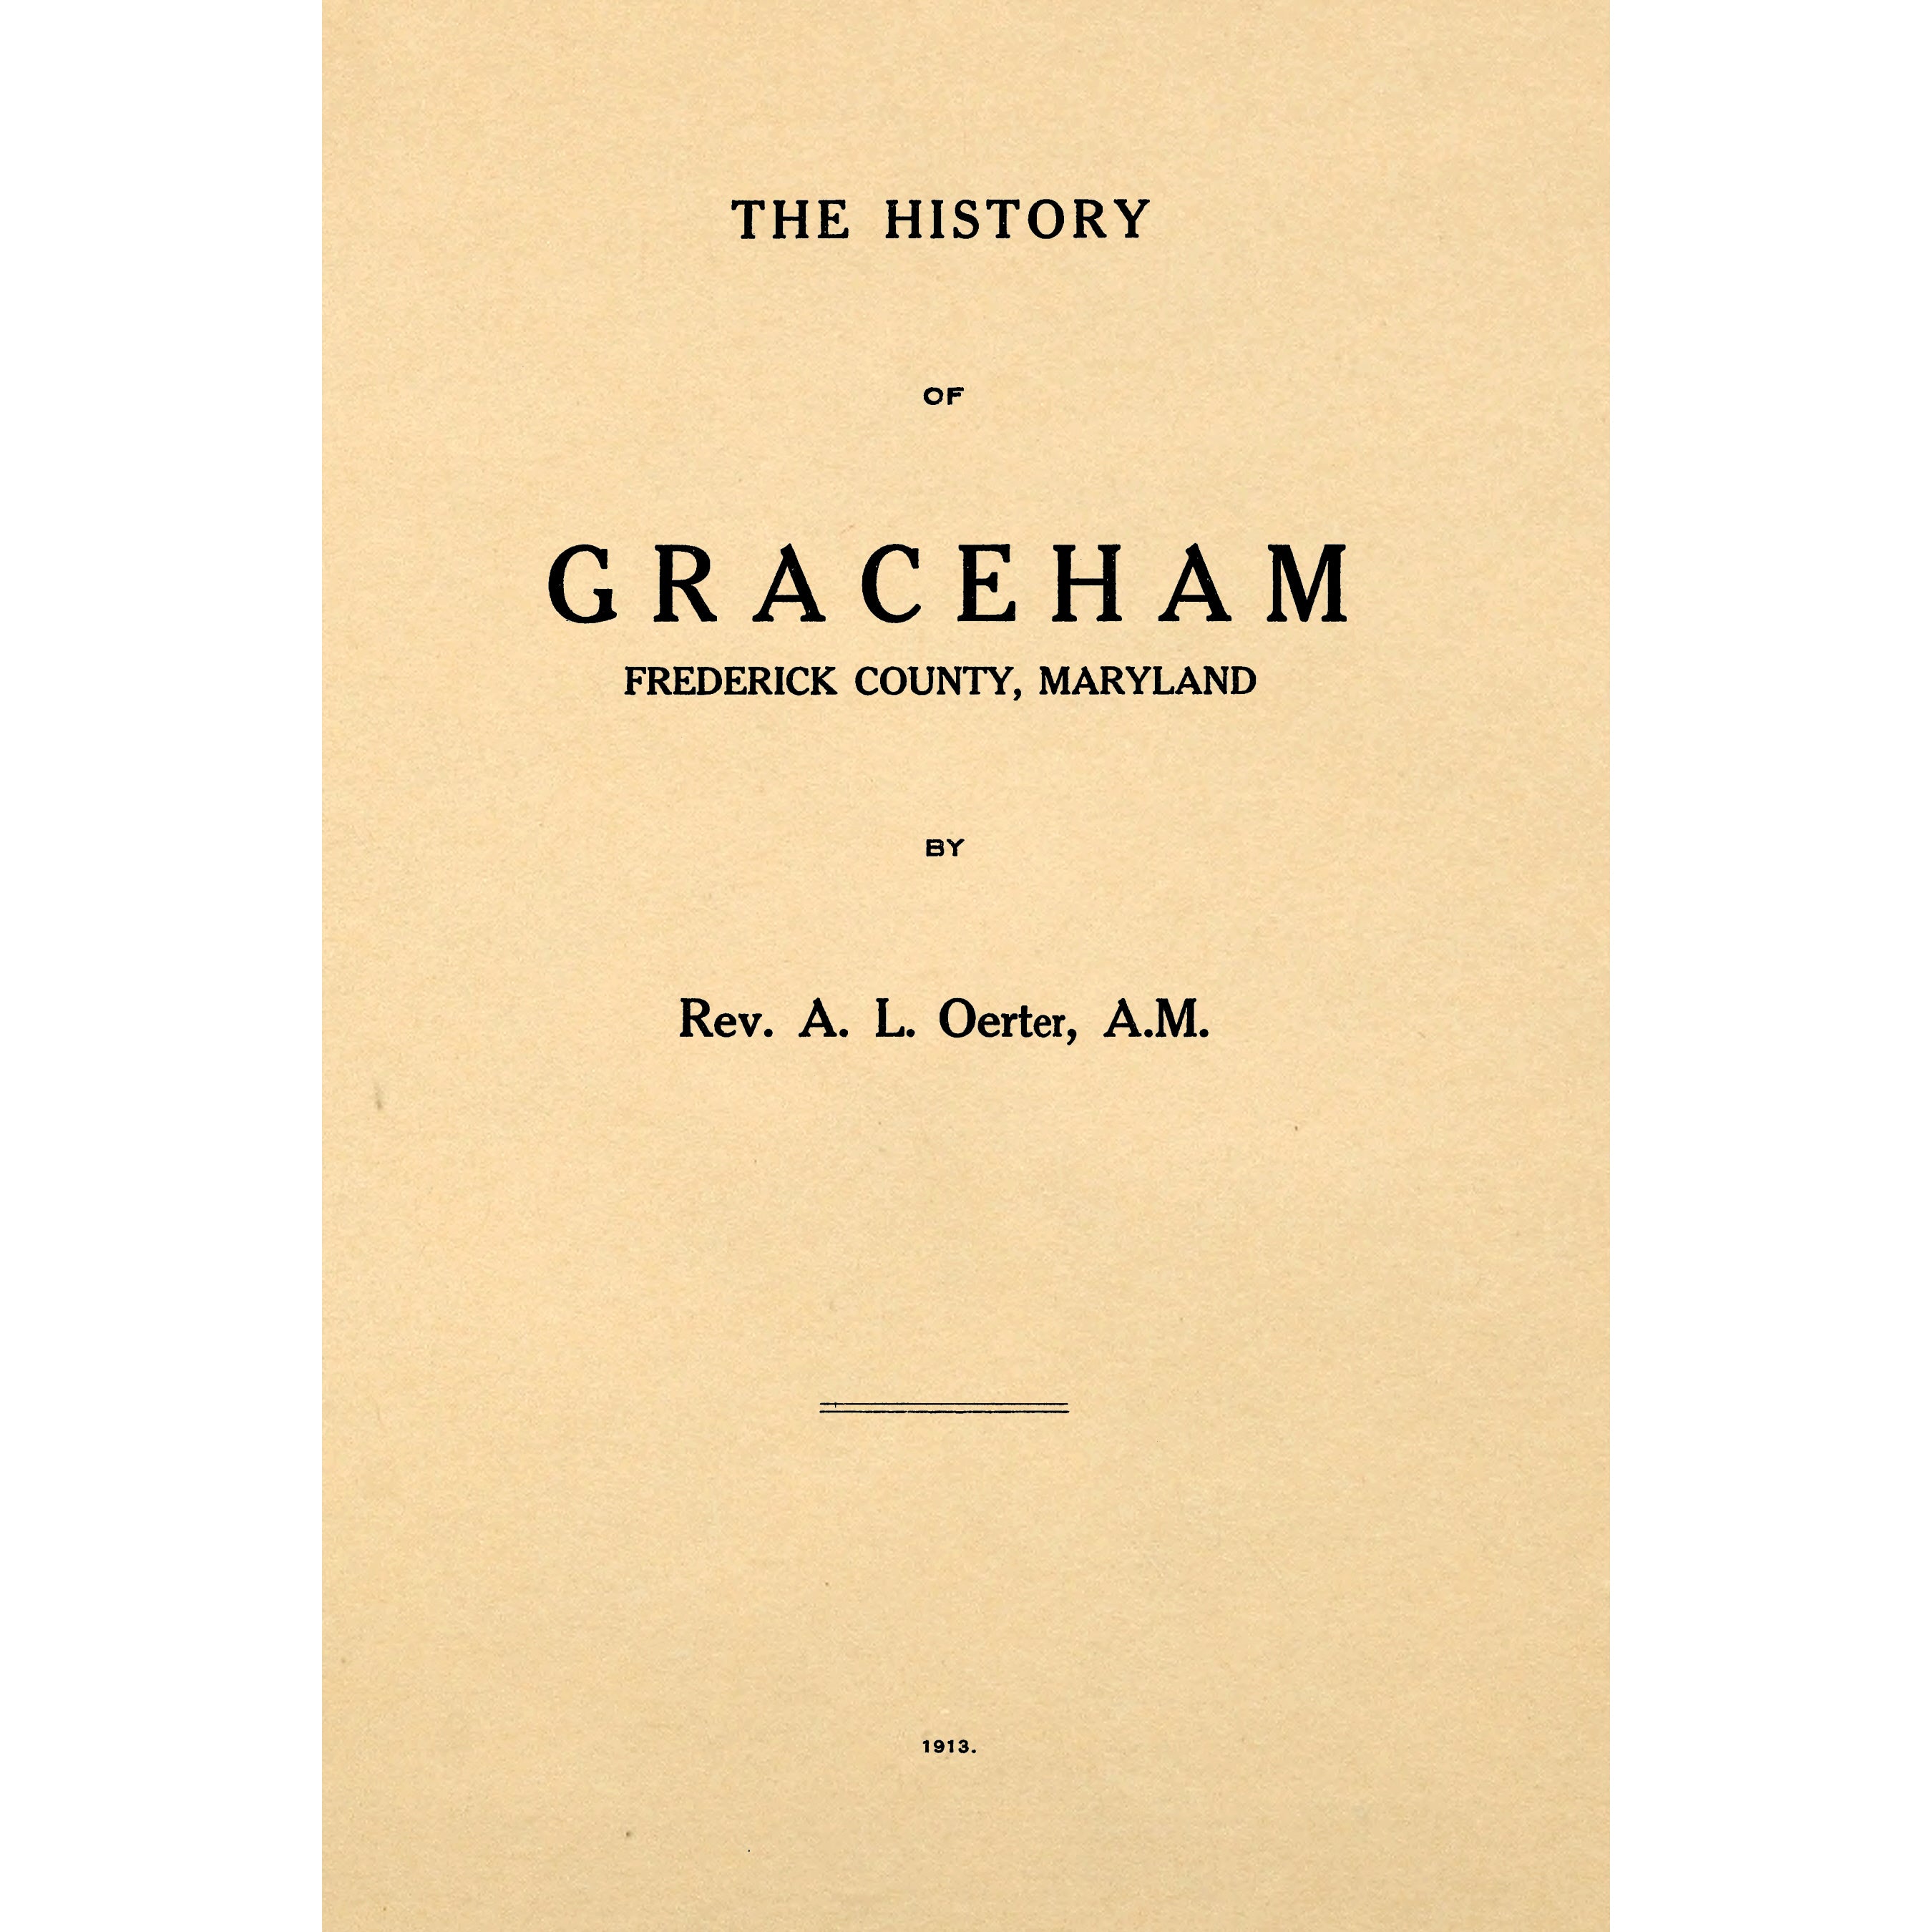 The history of Graceham, Frederick County, Maryland